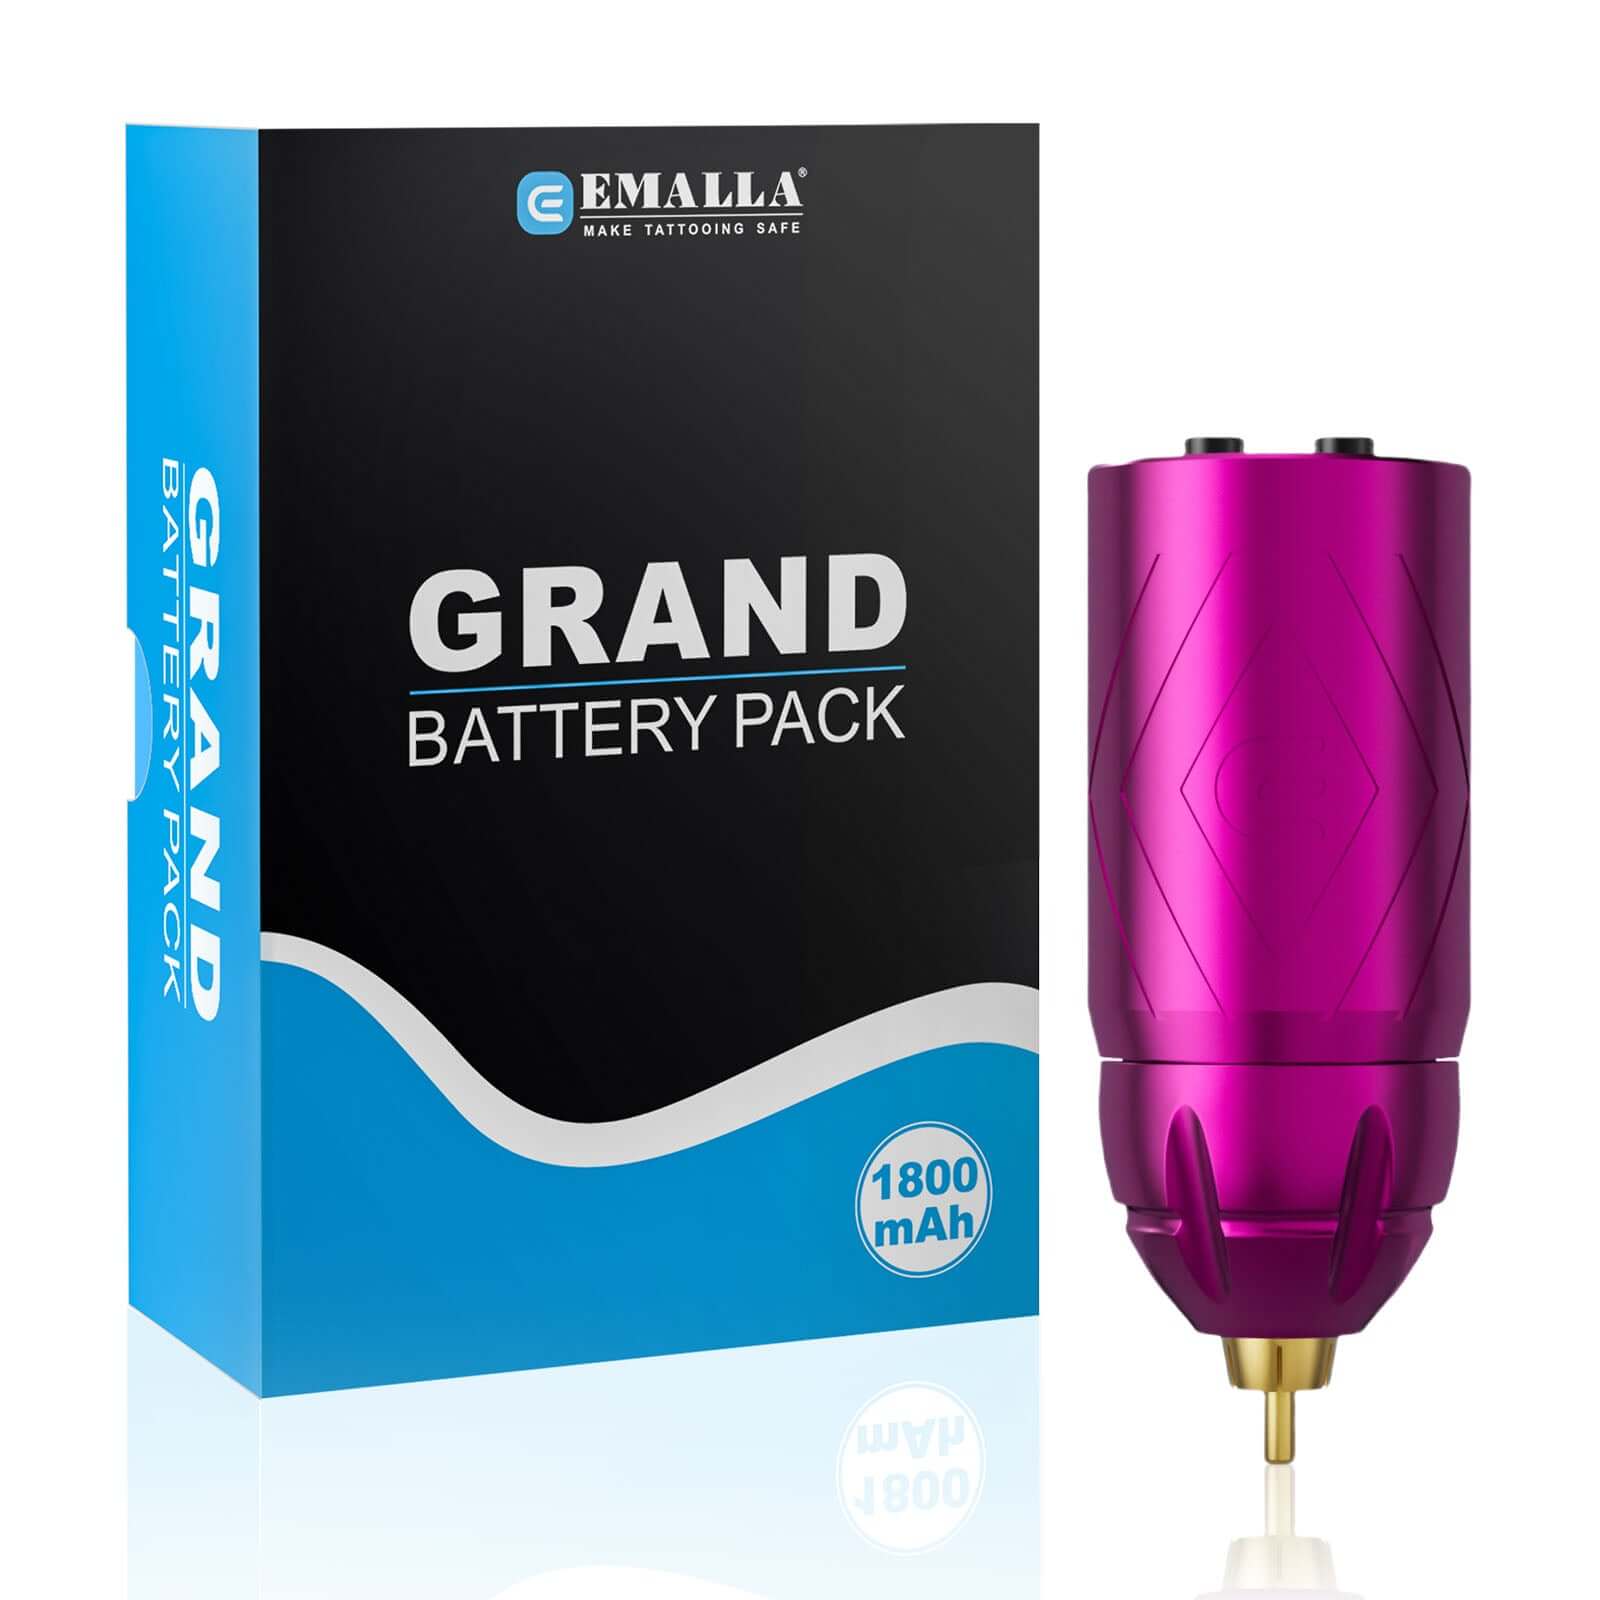 EMALLA GRAND Wireless Tattoo Battery Power Supply RCA Connect 1800mAh (Pink)